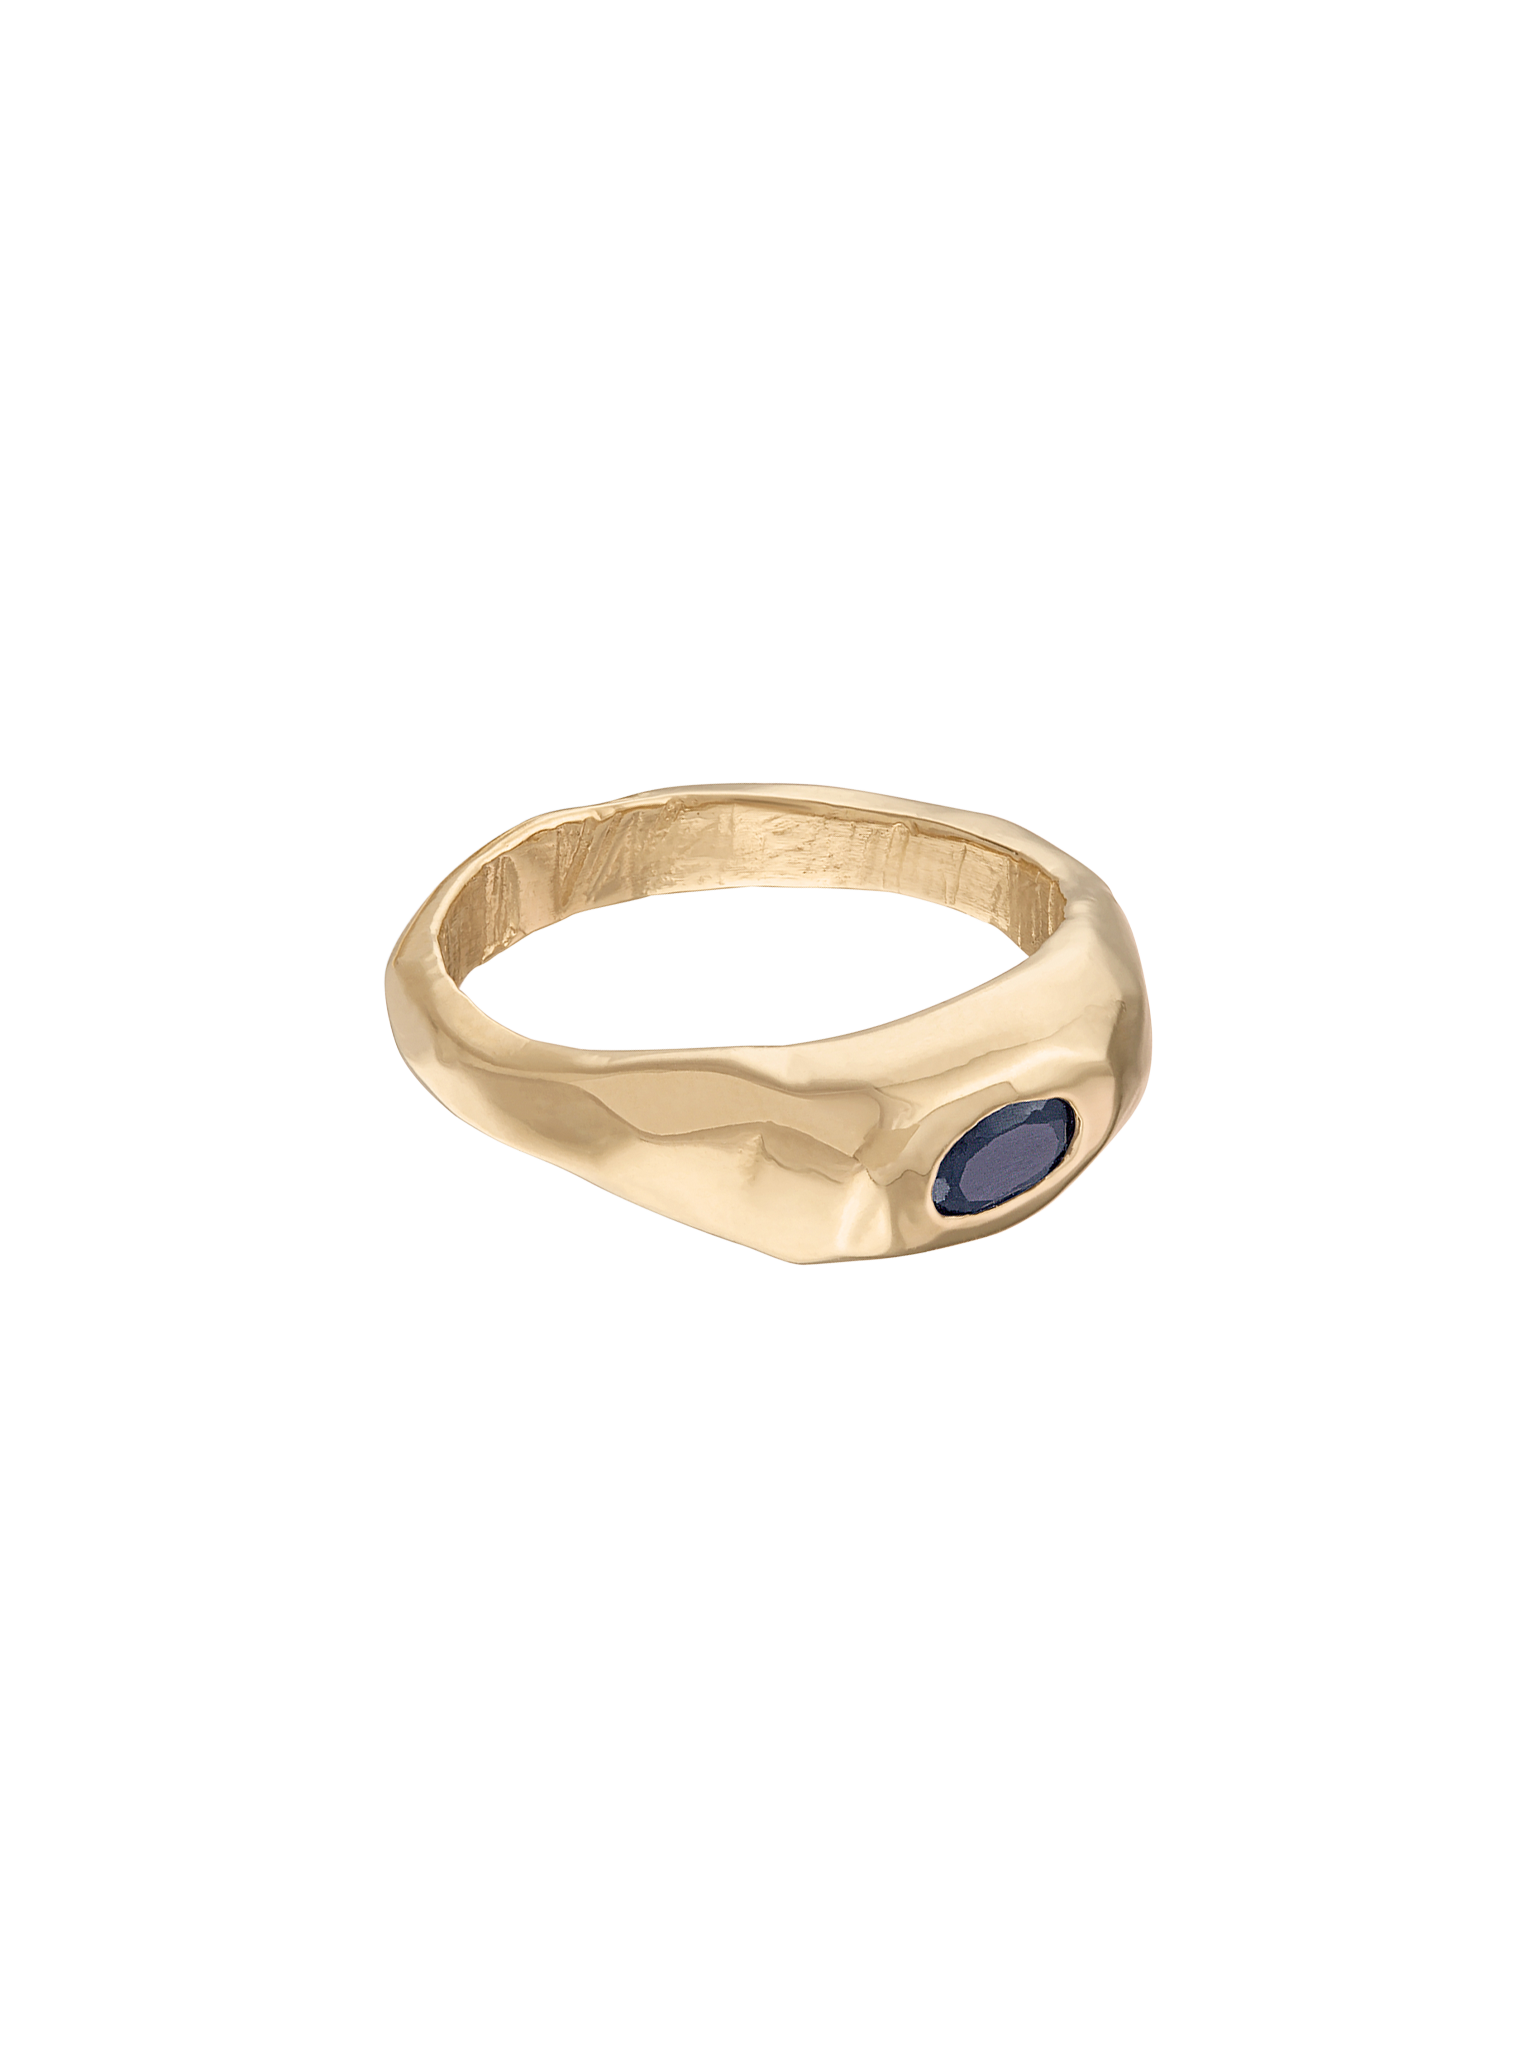 Sapphire solitaire ring iii